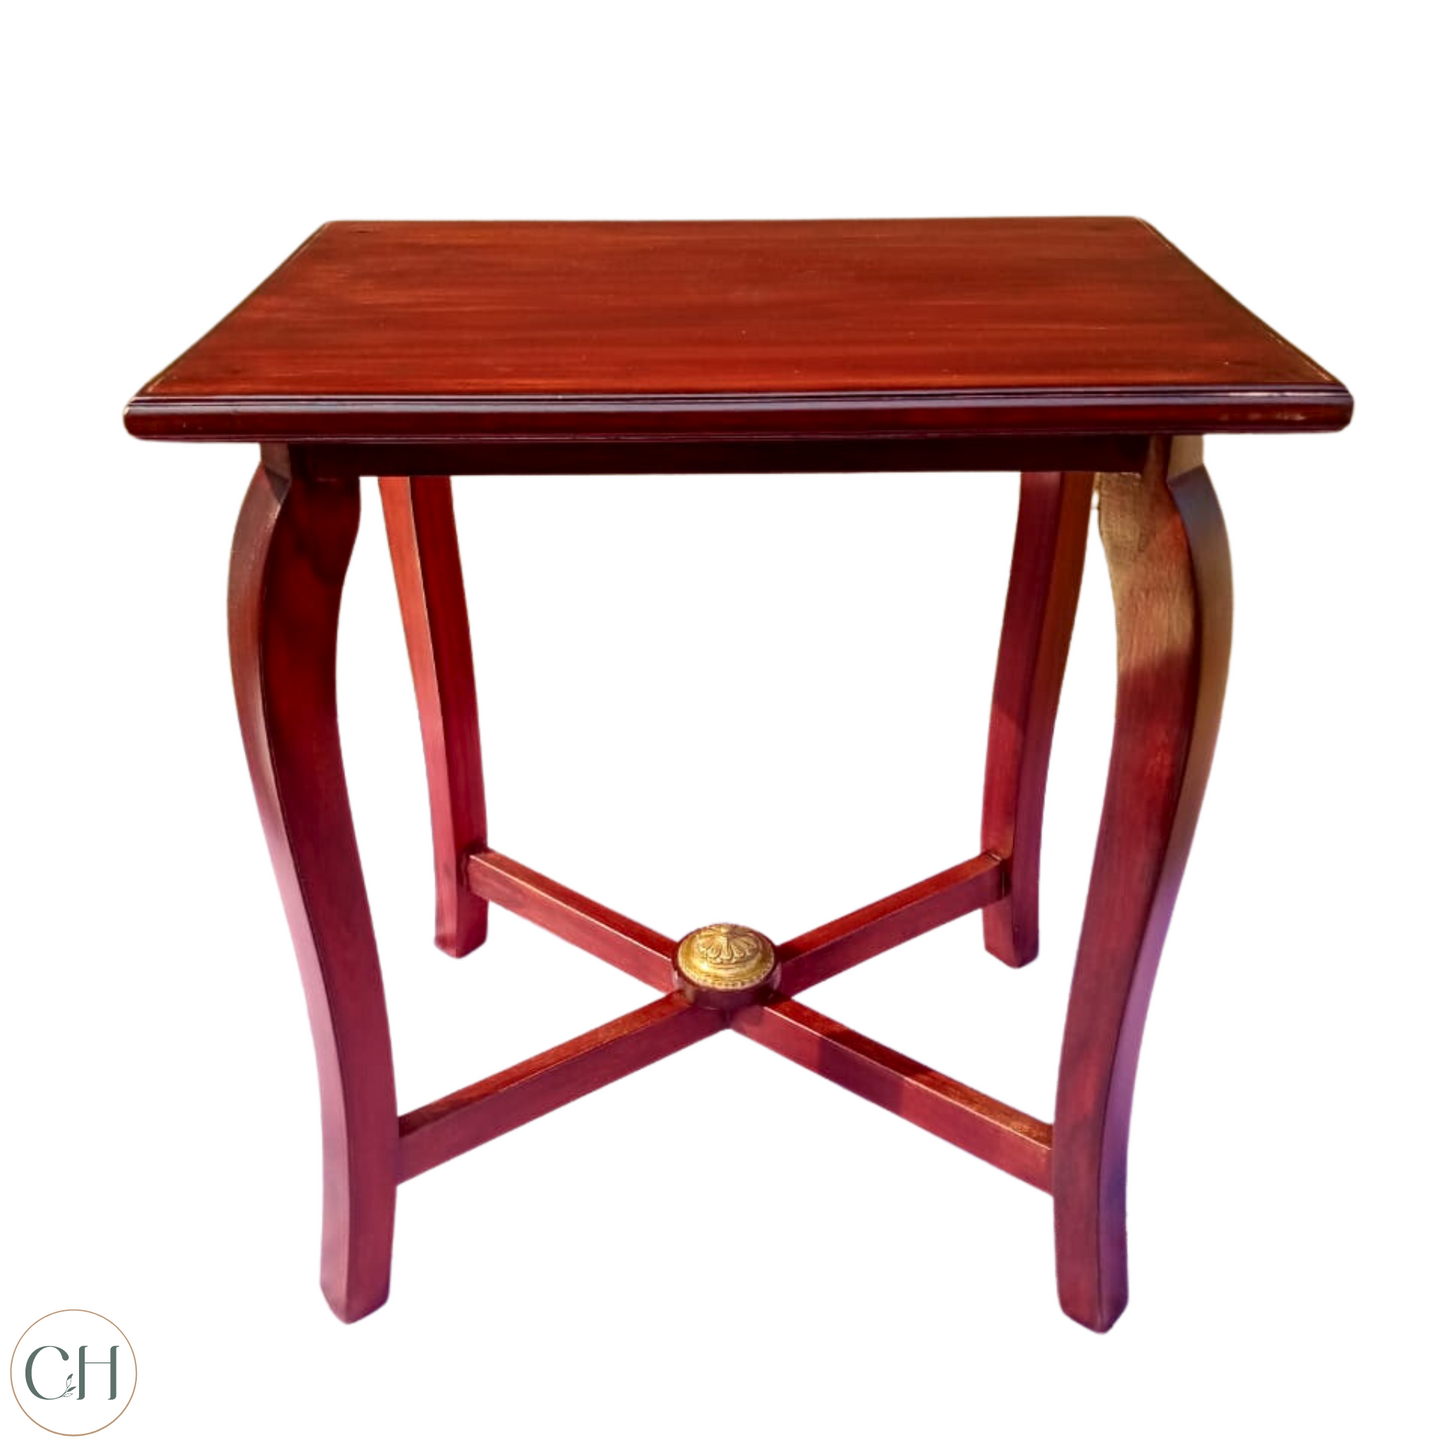 Rosa - Accent Table with Cabriole Legs and Rosewood Finish - CustHum